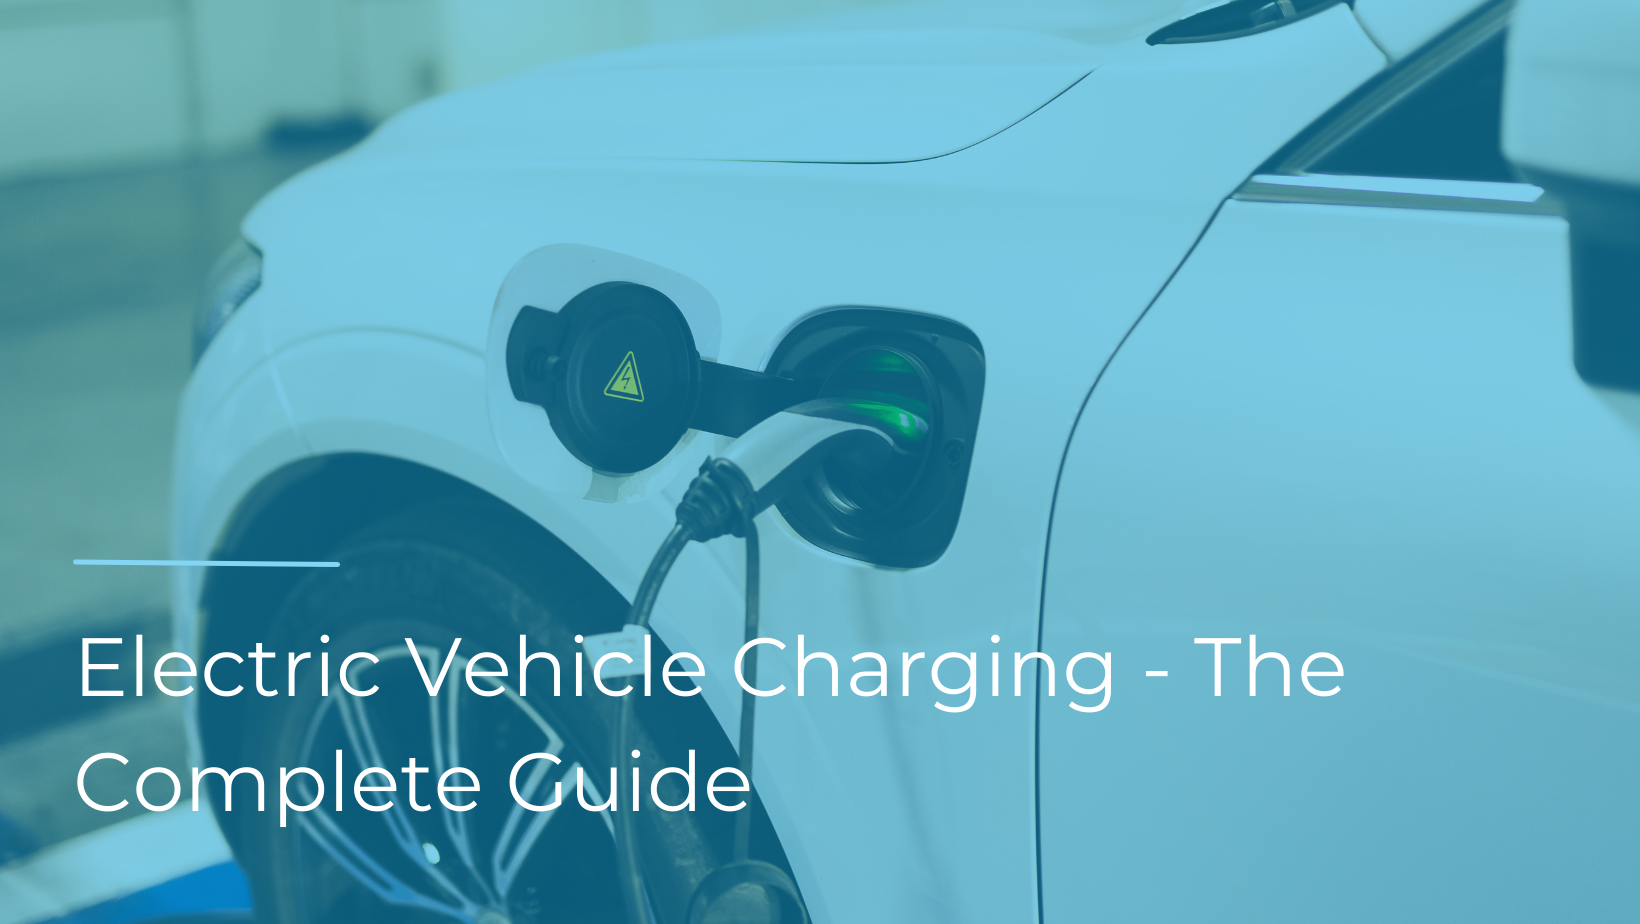 How Does Electric Vehicle Charging Work?